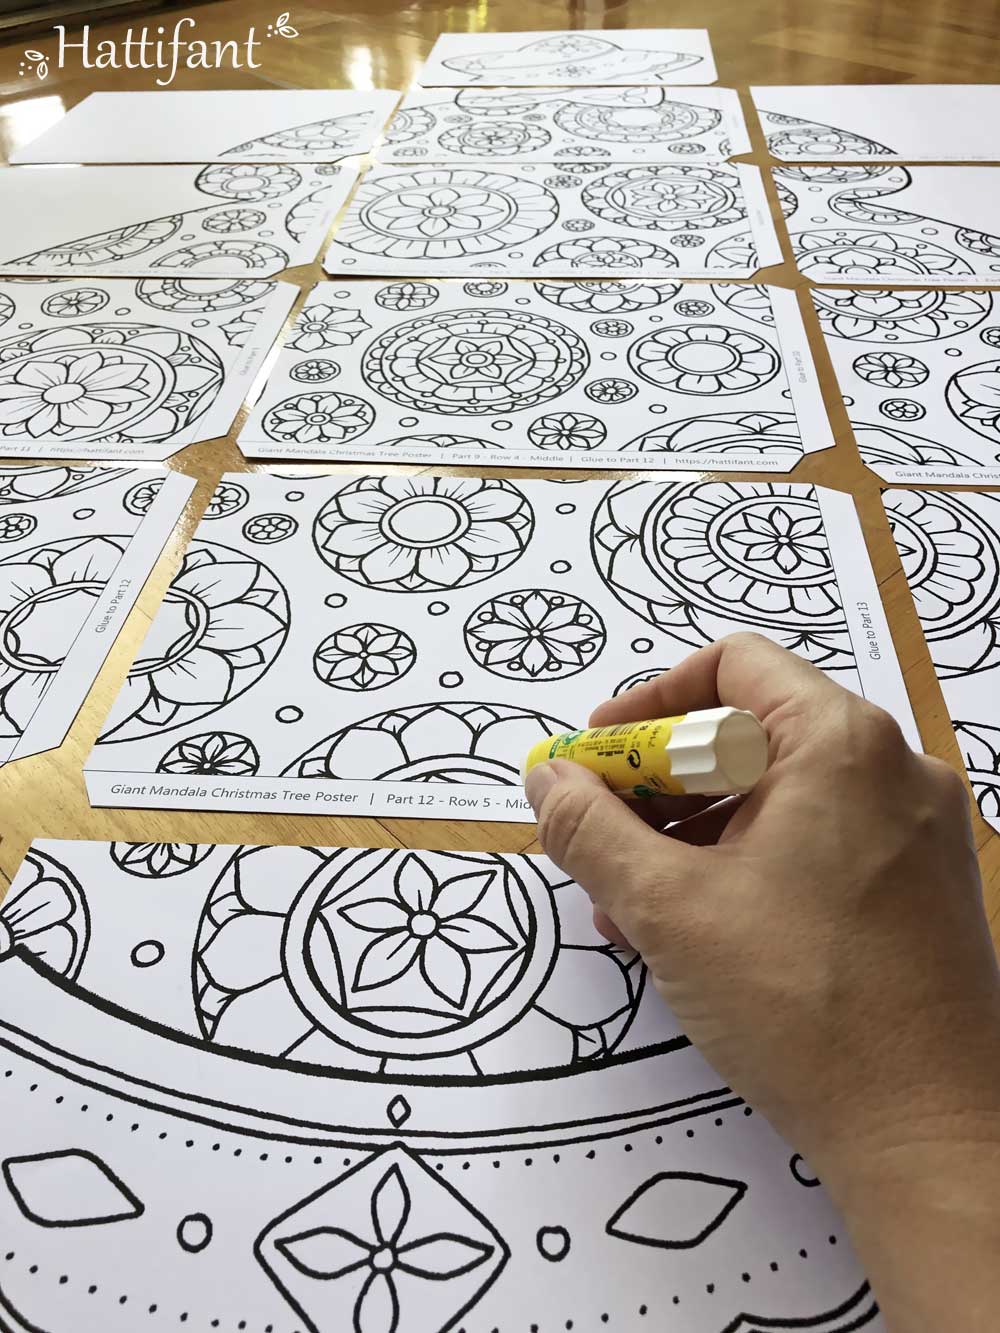 Hattifant's Giant Mandala Christmas Tree Poster to Color In